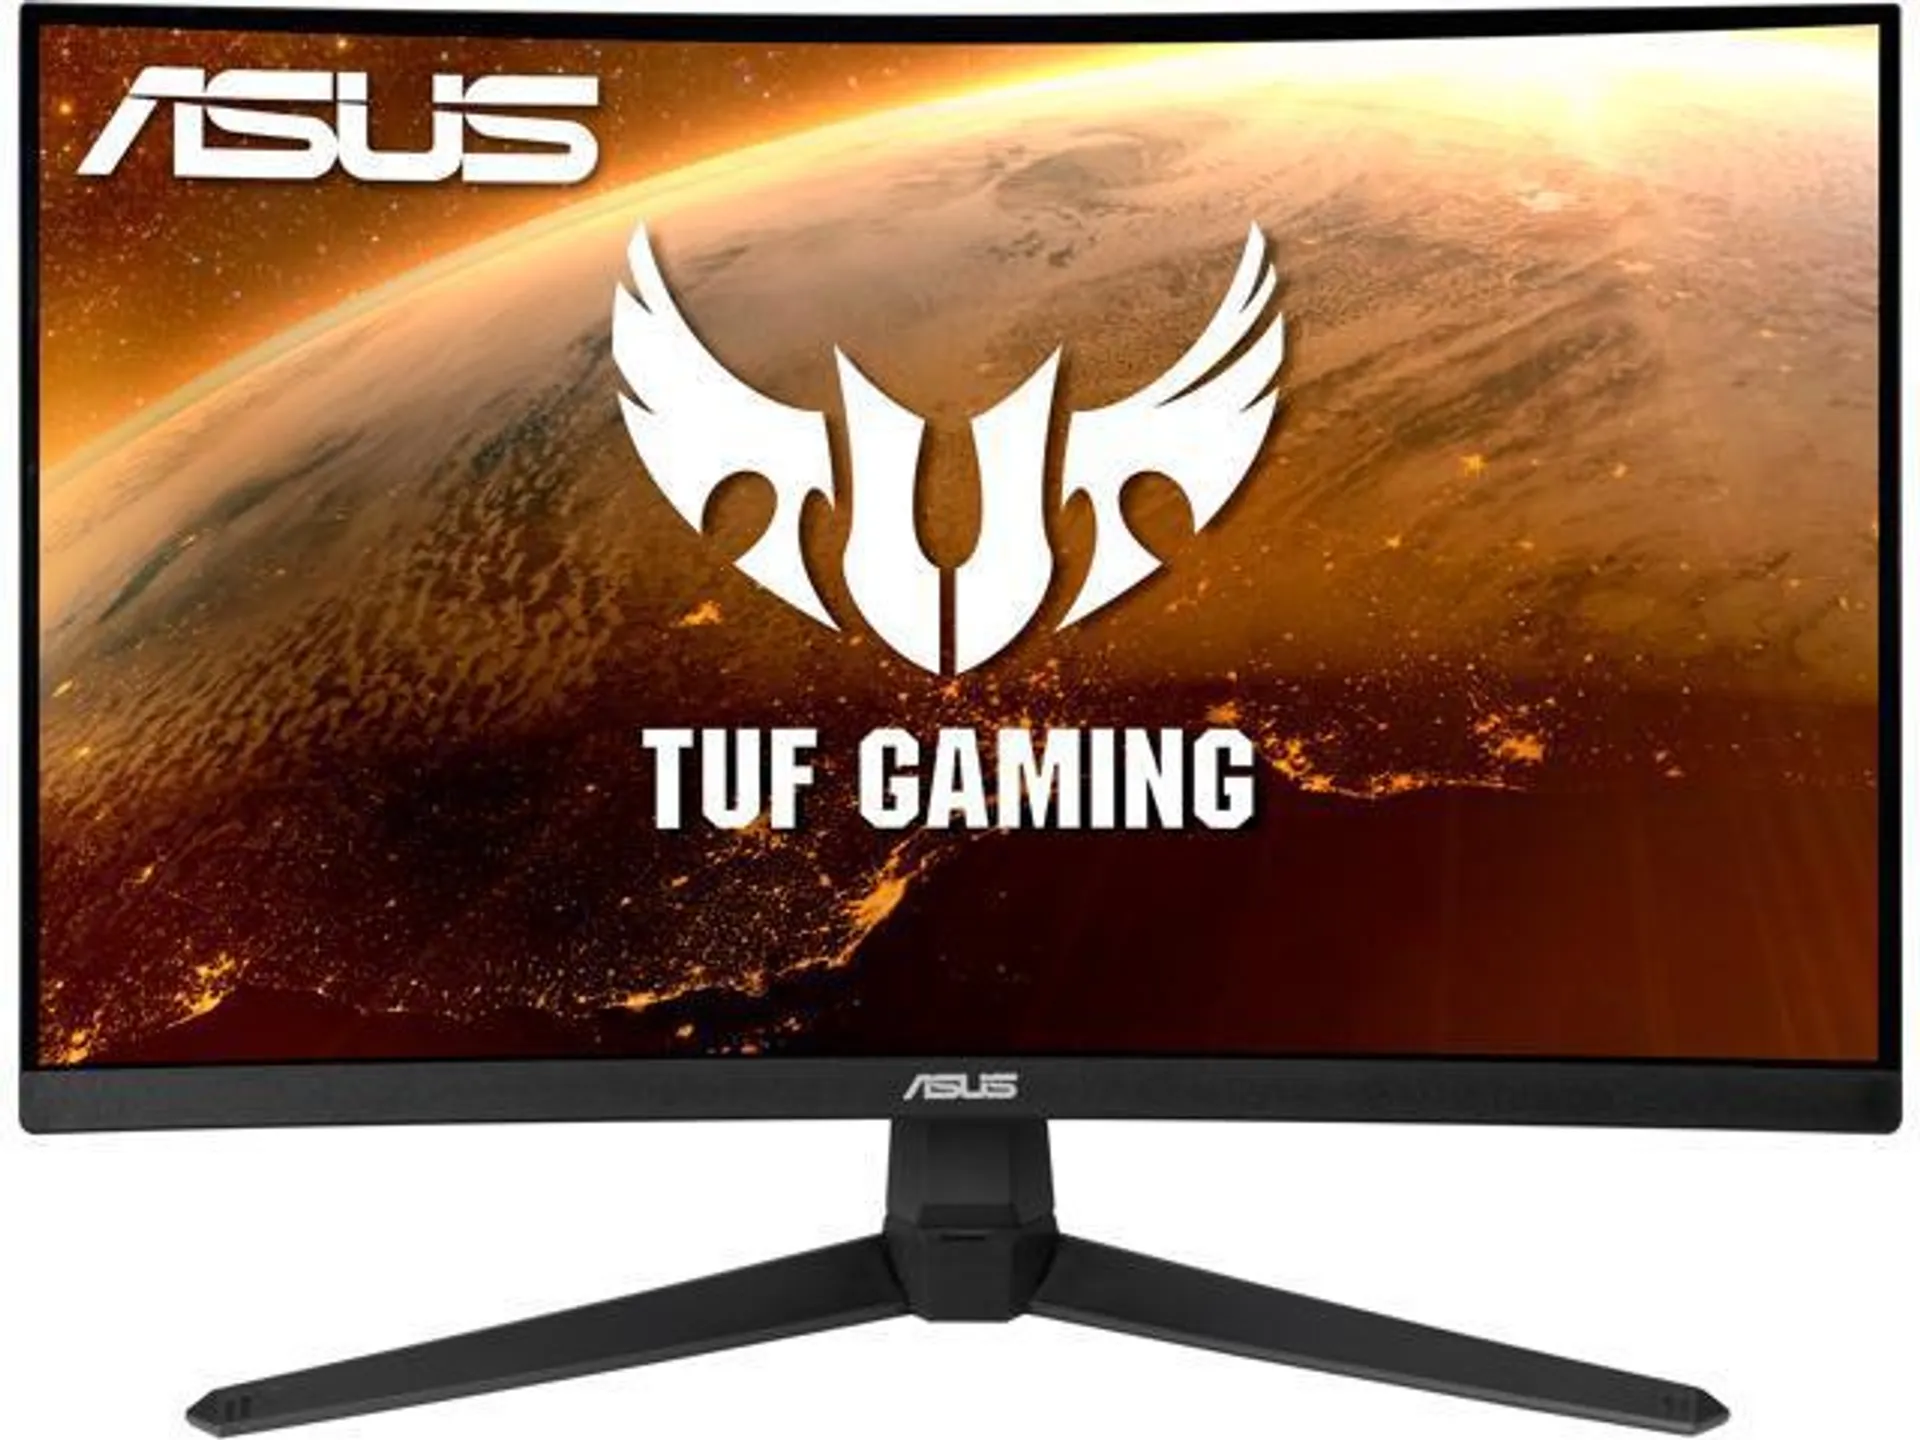 ASUS TUF Gaming 24" (23.8" viewable) 1080P Curved Gaming Monitor (VG24VQ1B) - Full HD, 165Hz (Supports 144Hz), 1ms, Extreme Low Motion Blur, Speakers, Adaptive-sync/FreeSync Premium, Eye Care, DisplayPort, HDMI